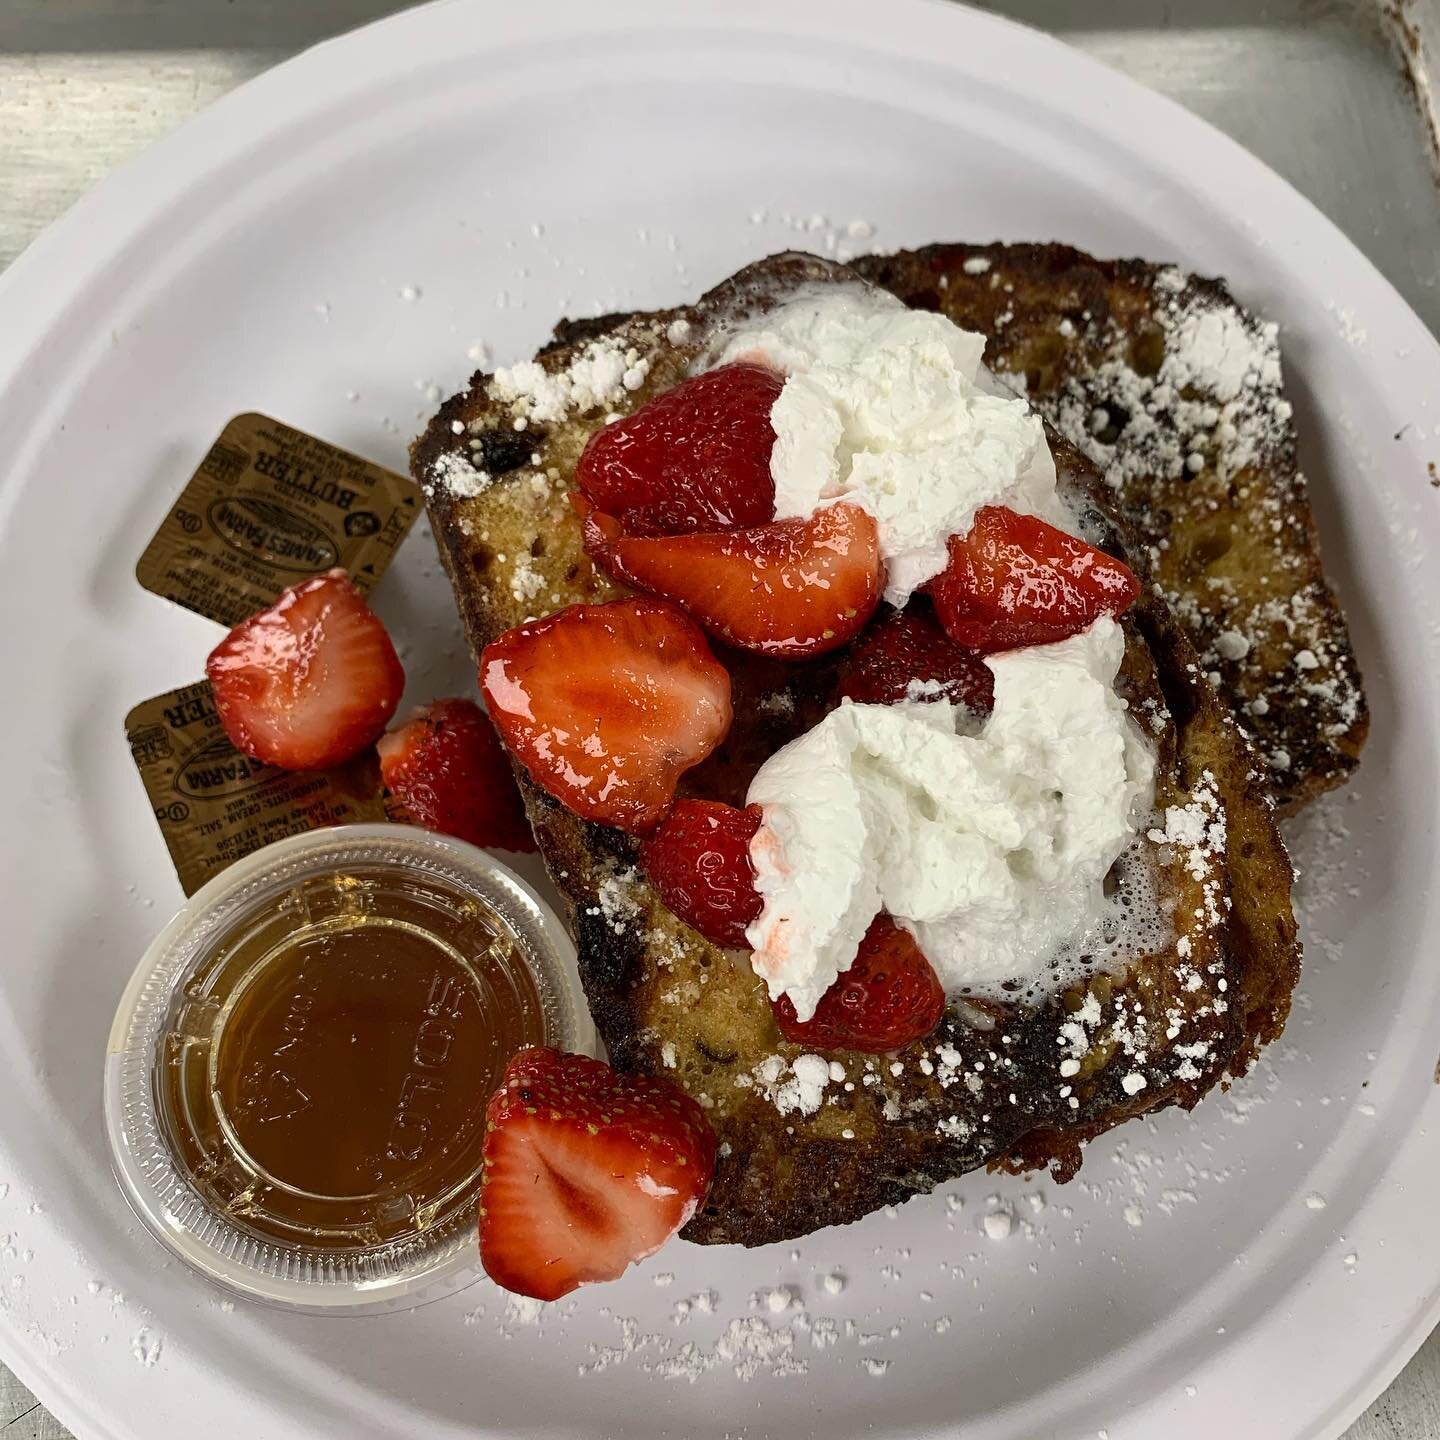 Homemade Cinnamon raisin French toast topped with strawberries and whipped cream. Breakfast served in till 12!